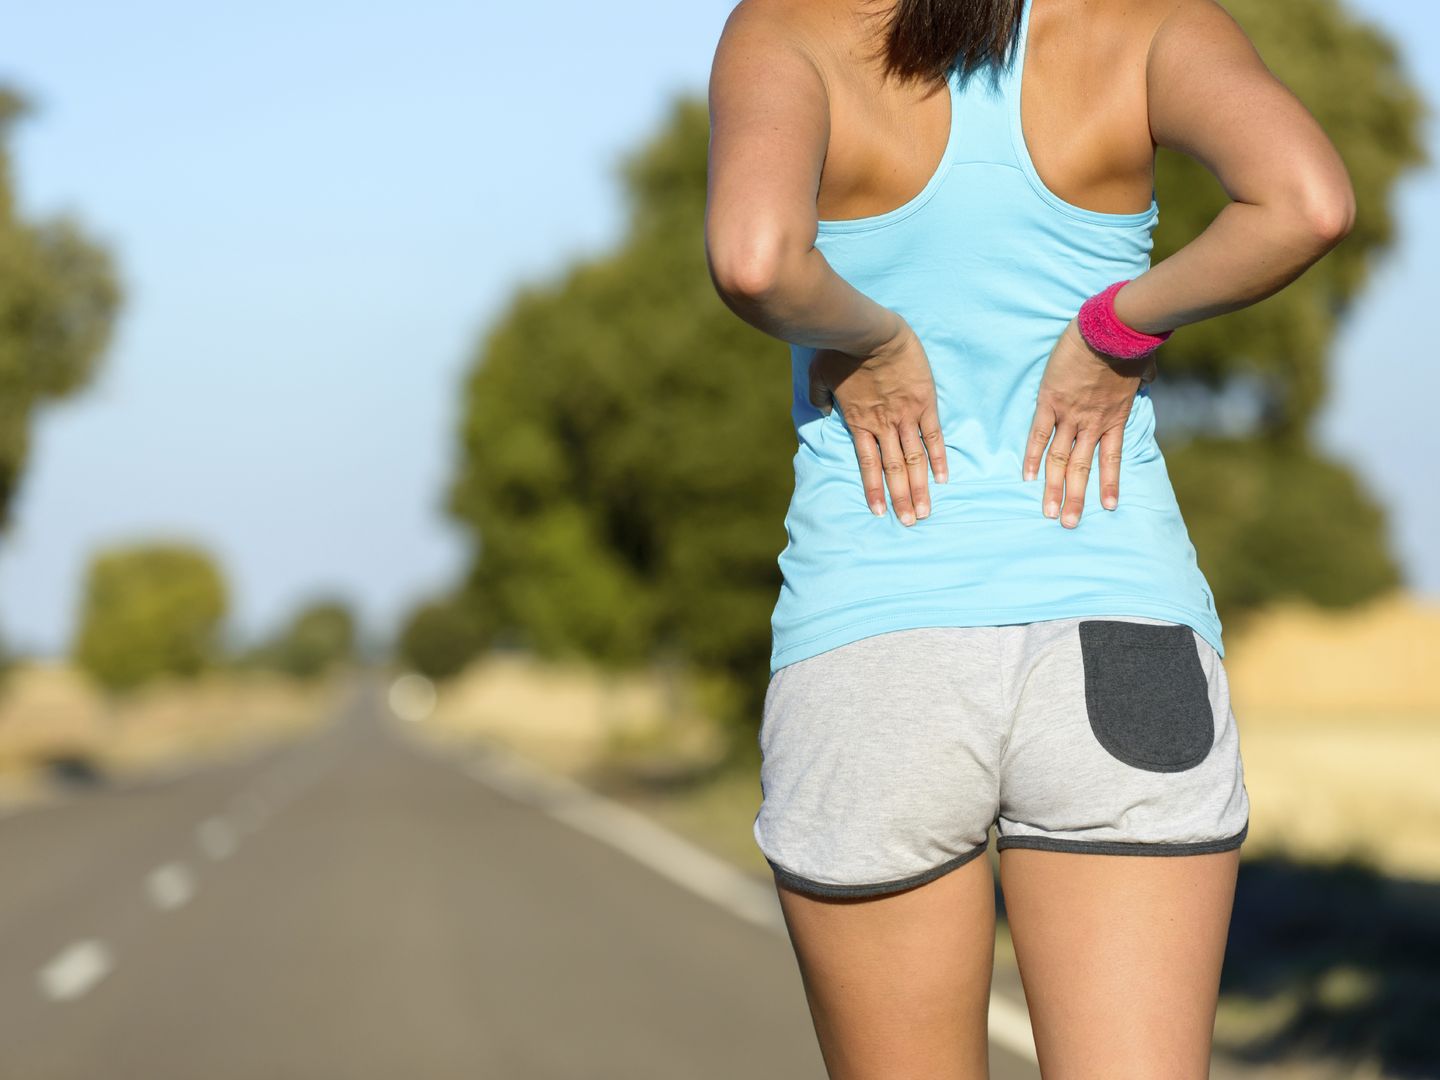 Female runner athlete low back injury and pain. Woman suffering from painful lumbago while running in rural road.